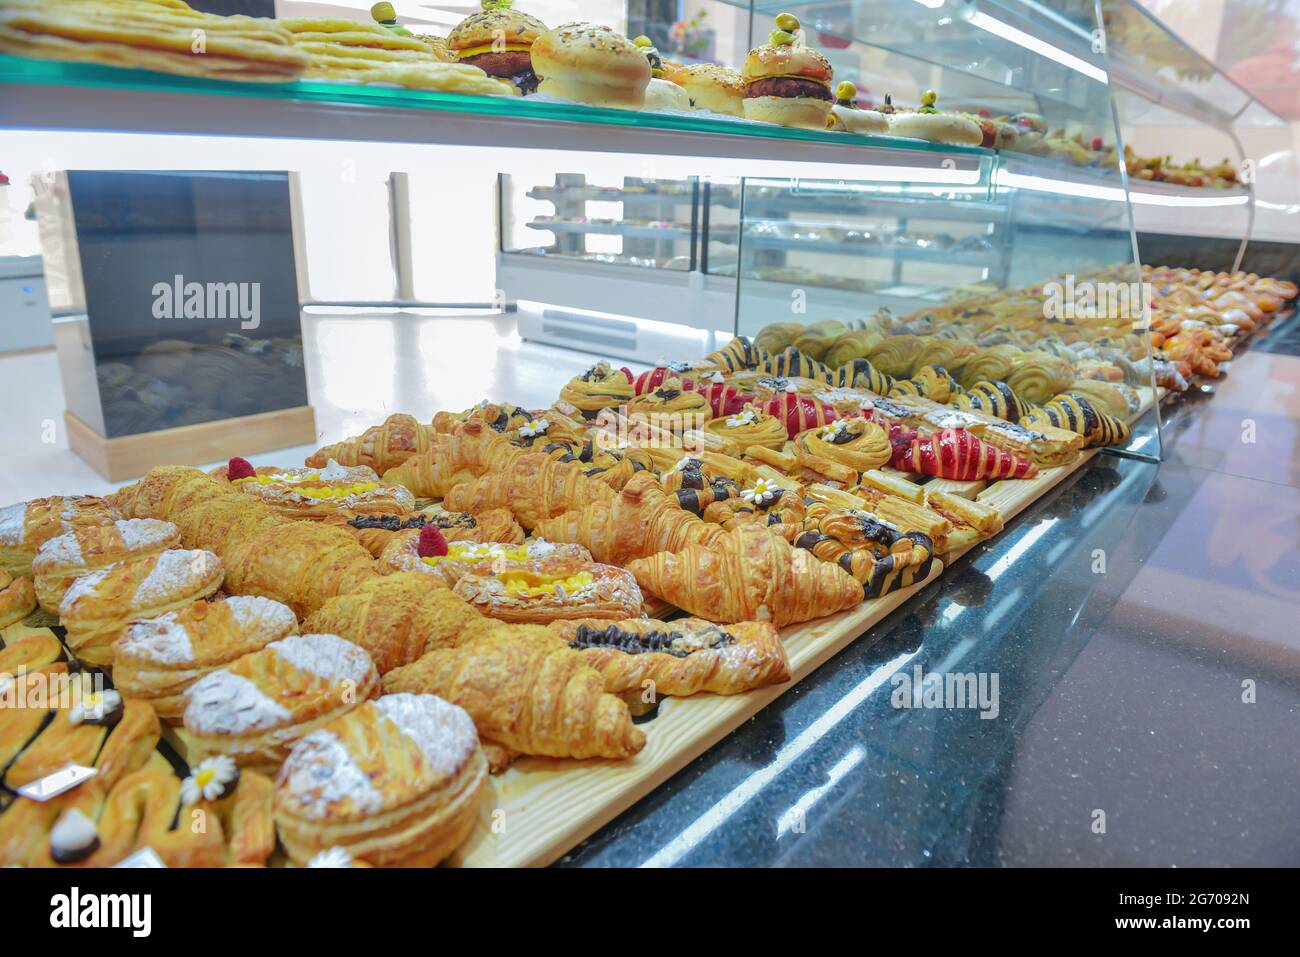 Bakery bread pastry sweets display window case Stock Photo